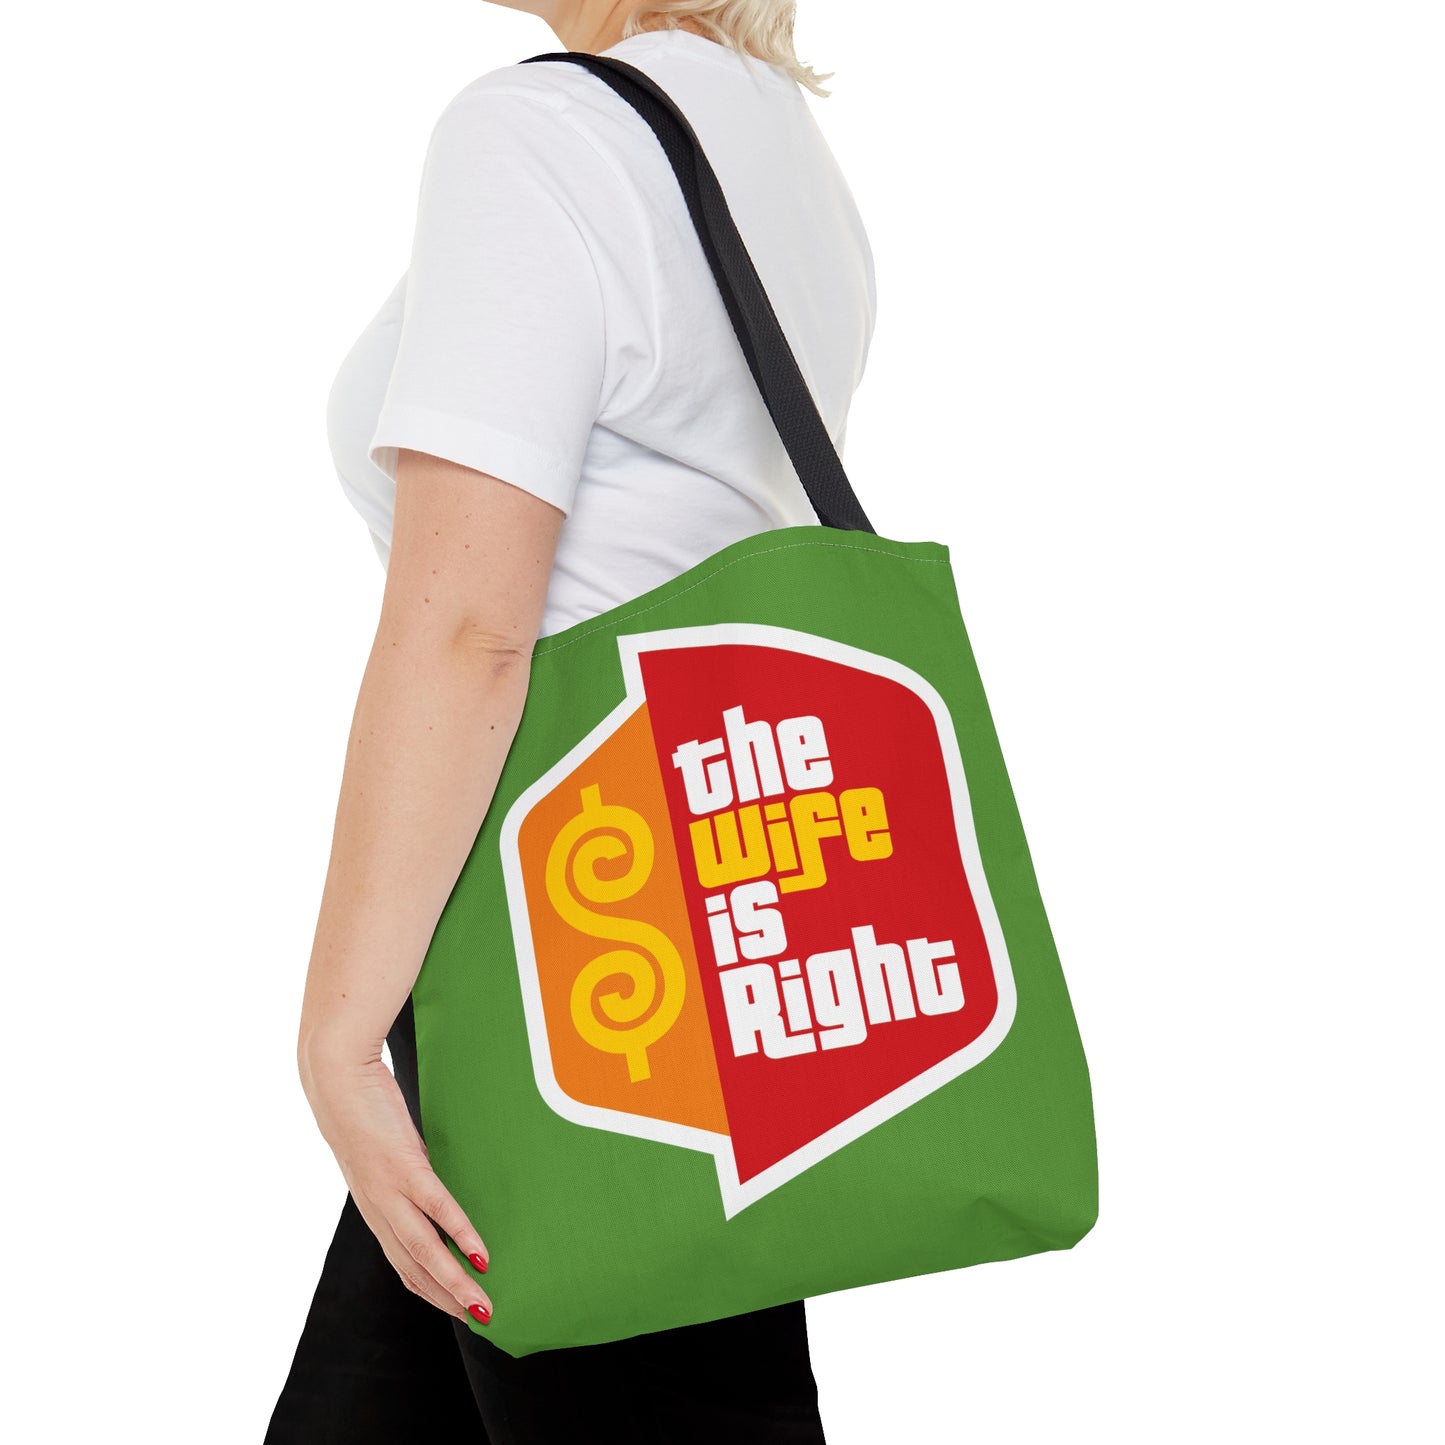 The Wife is Right Tote Bag - A Hilarious & Practical Festive Stylish Gift for All - Holiday Xmas Perfect Gift - Beach Bag Holiday Canvas Bag